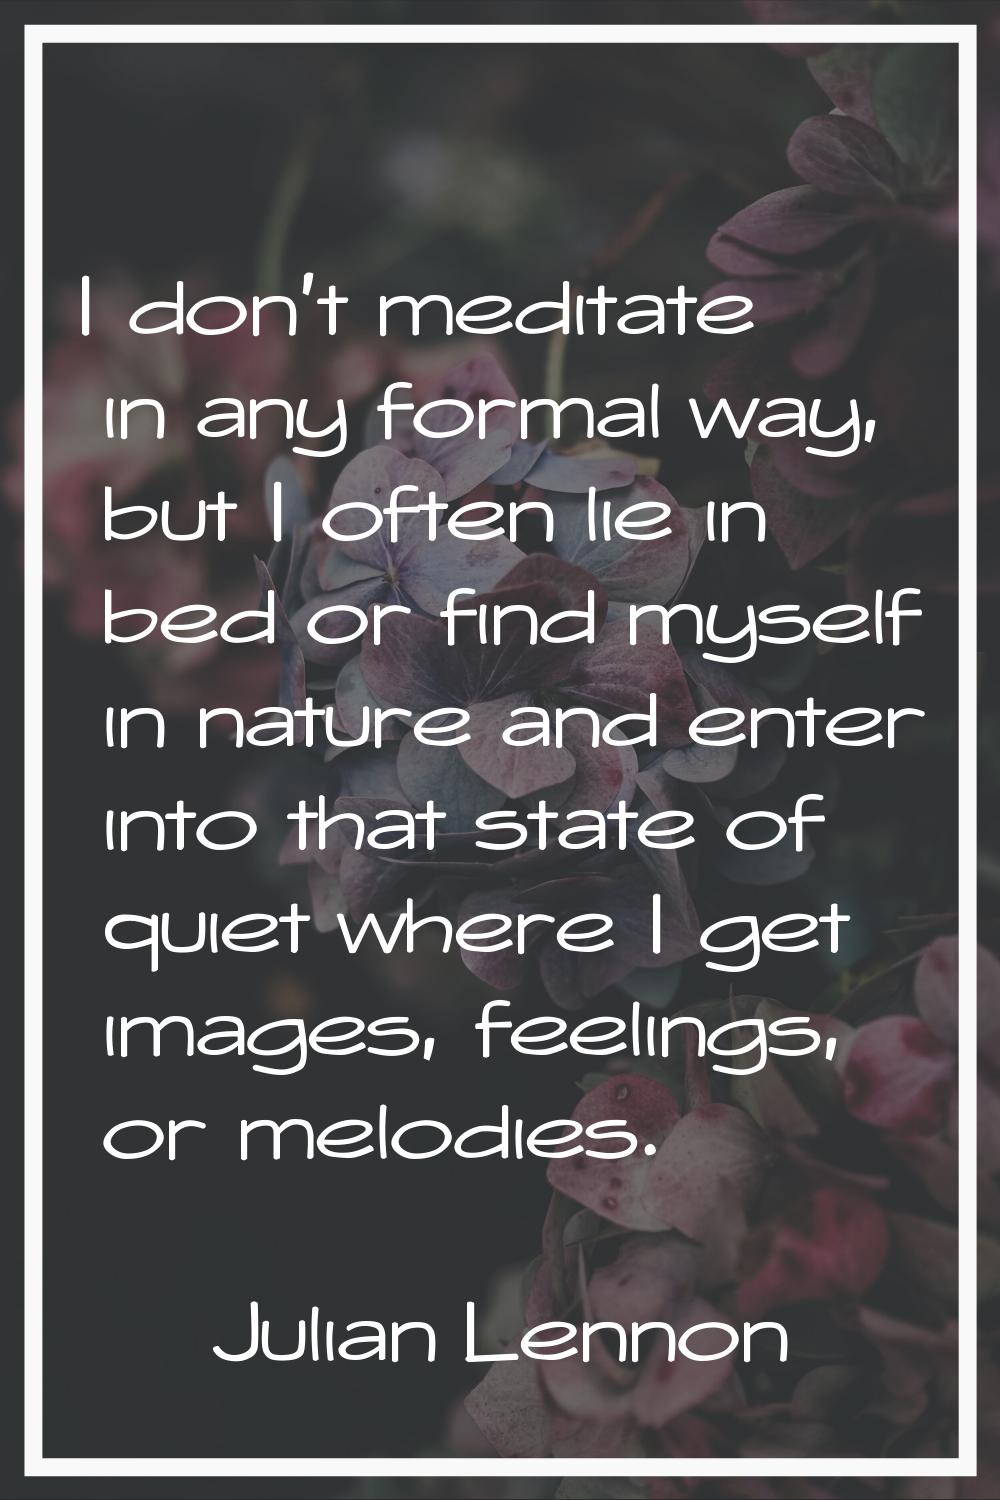 I don't meditate in any formal way, but I often lie in bed or find myself in nature and enter into 